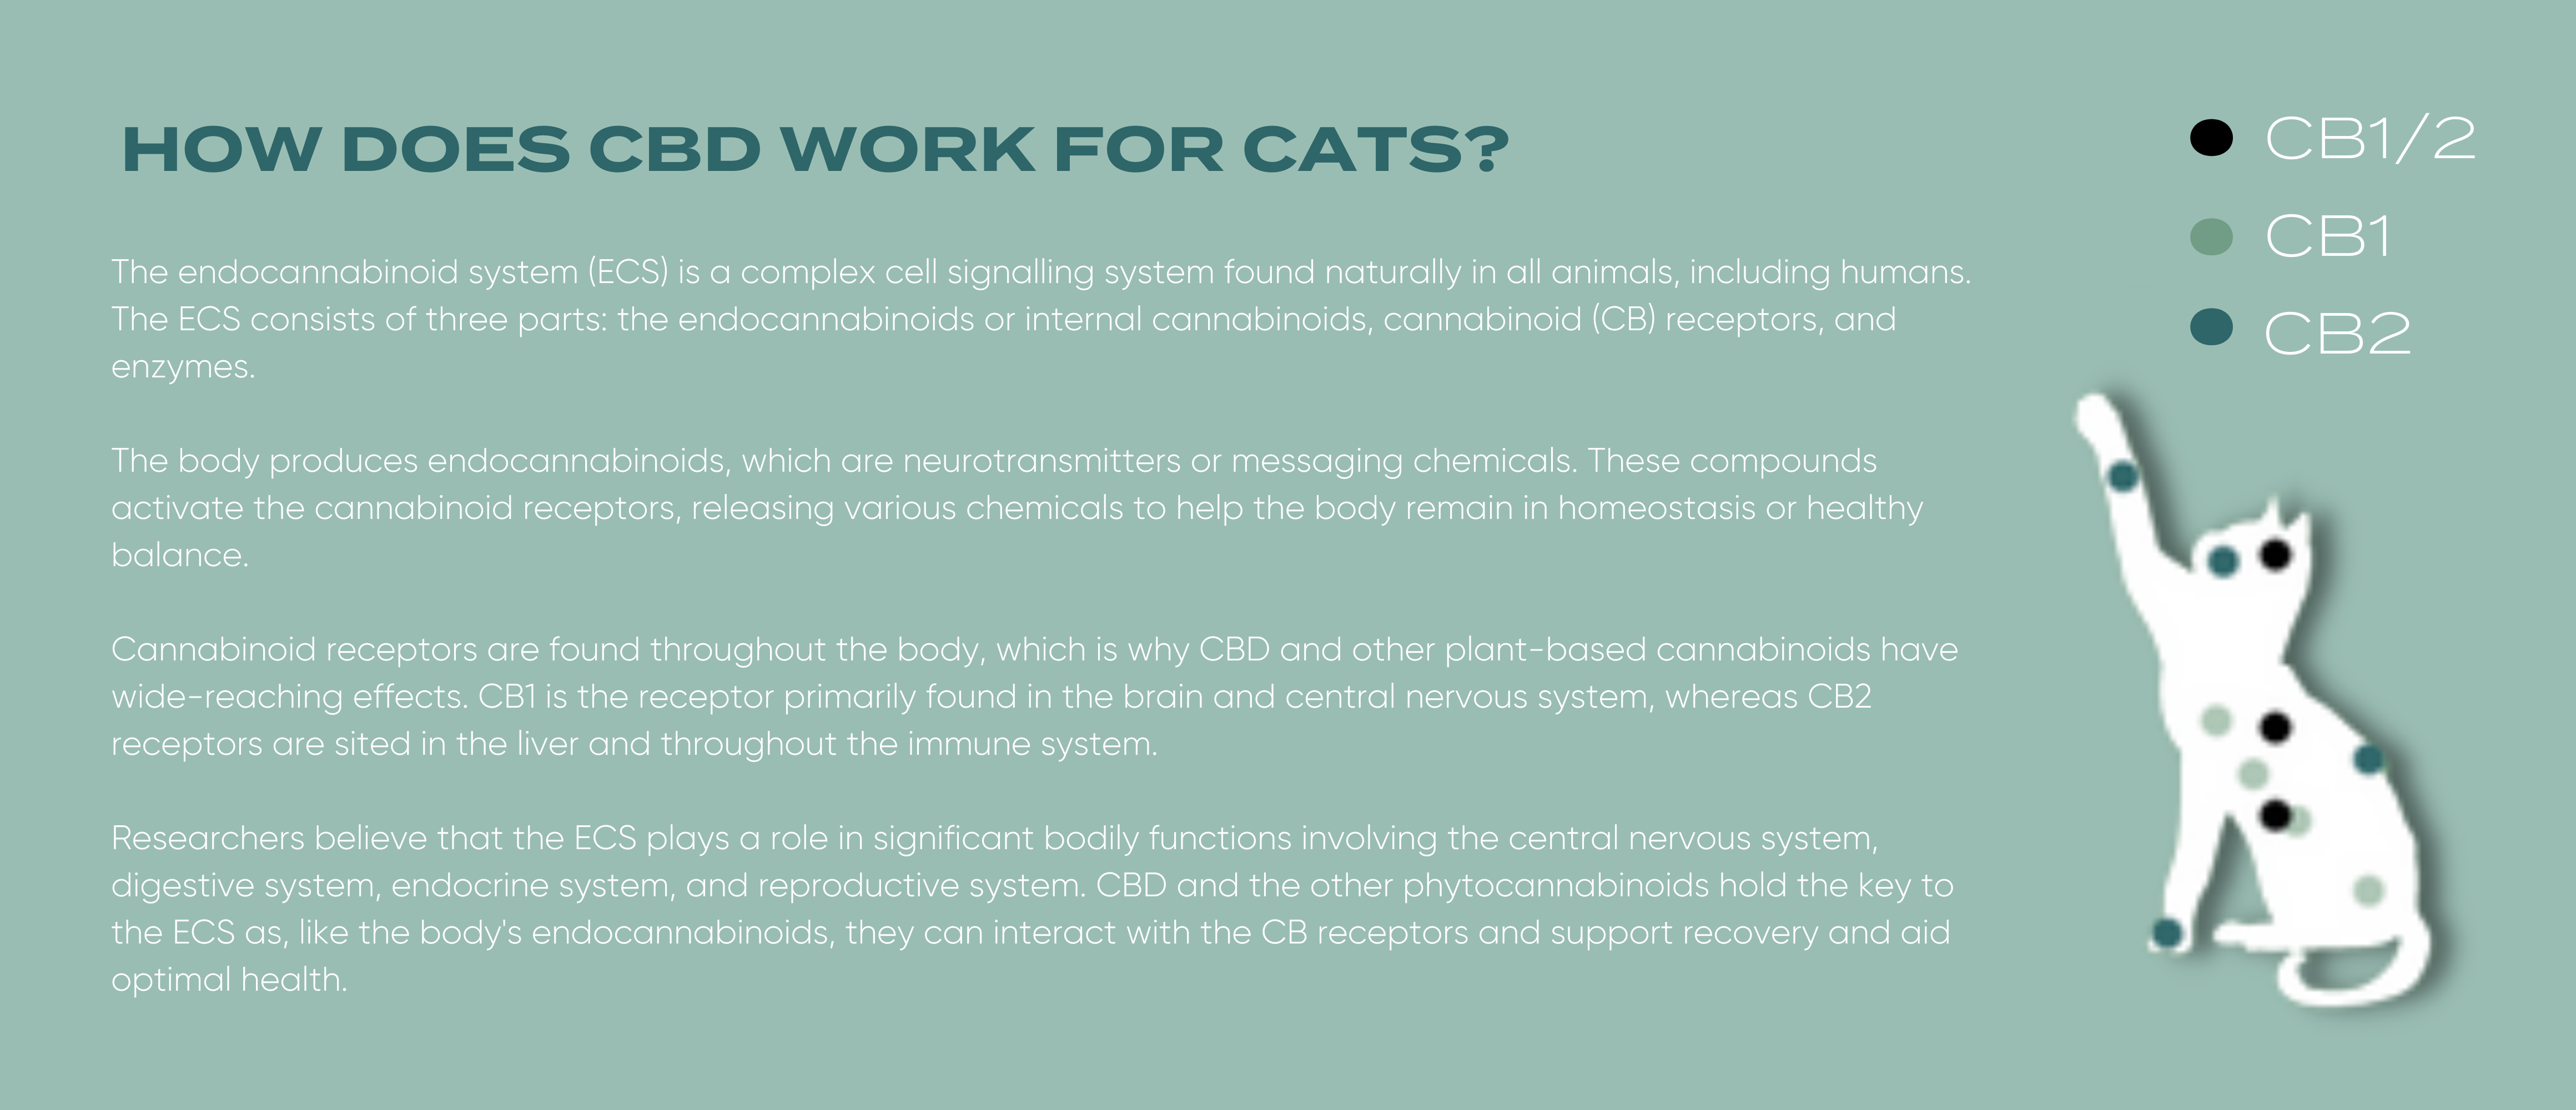 How does CBD work for cats